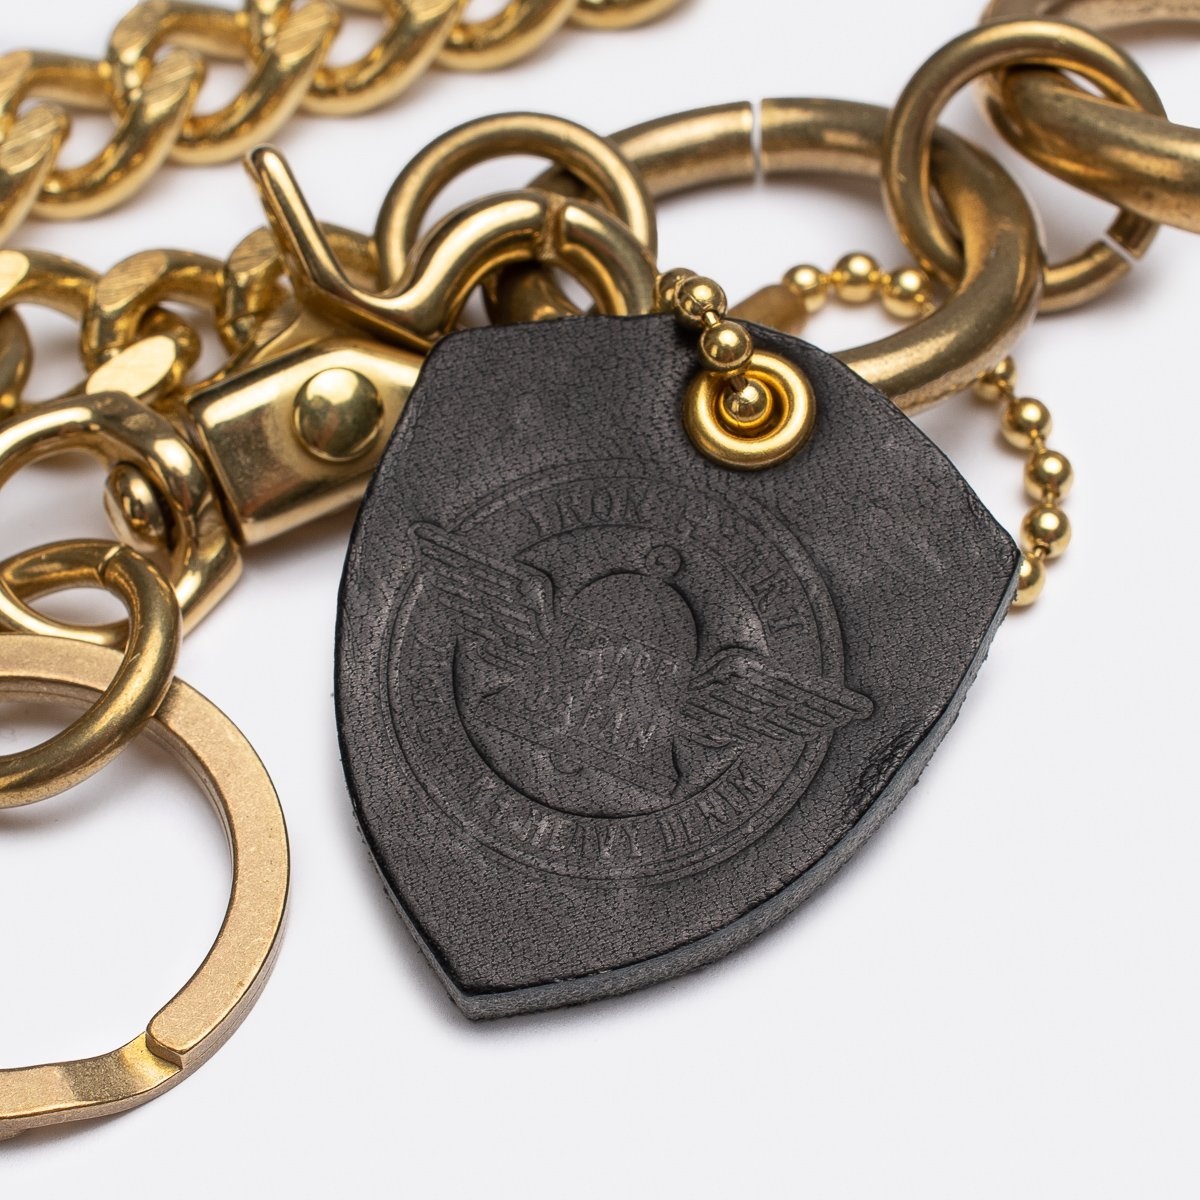 Brass-W15 Wallet Chain with Large Clip and Keyring - Brass - 5